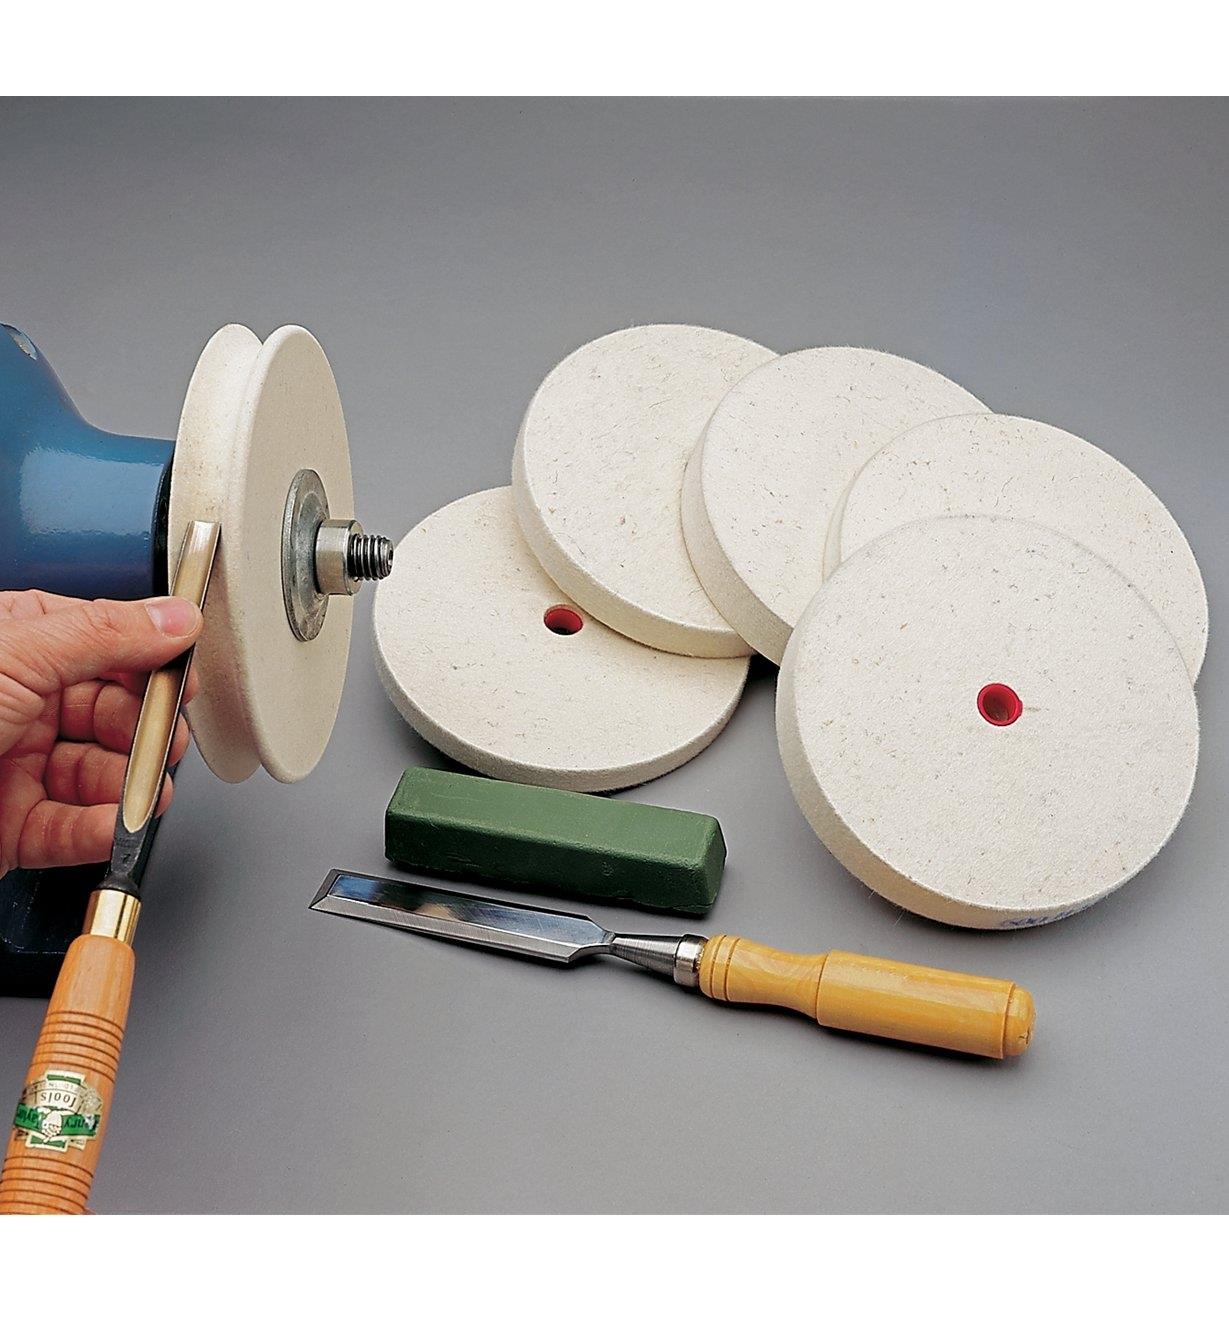 Honing a gouge on a shaped felt wheel, next to a pile of felt wheels, a chisel and a bar of honing compound